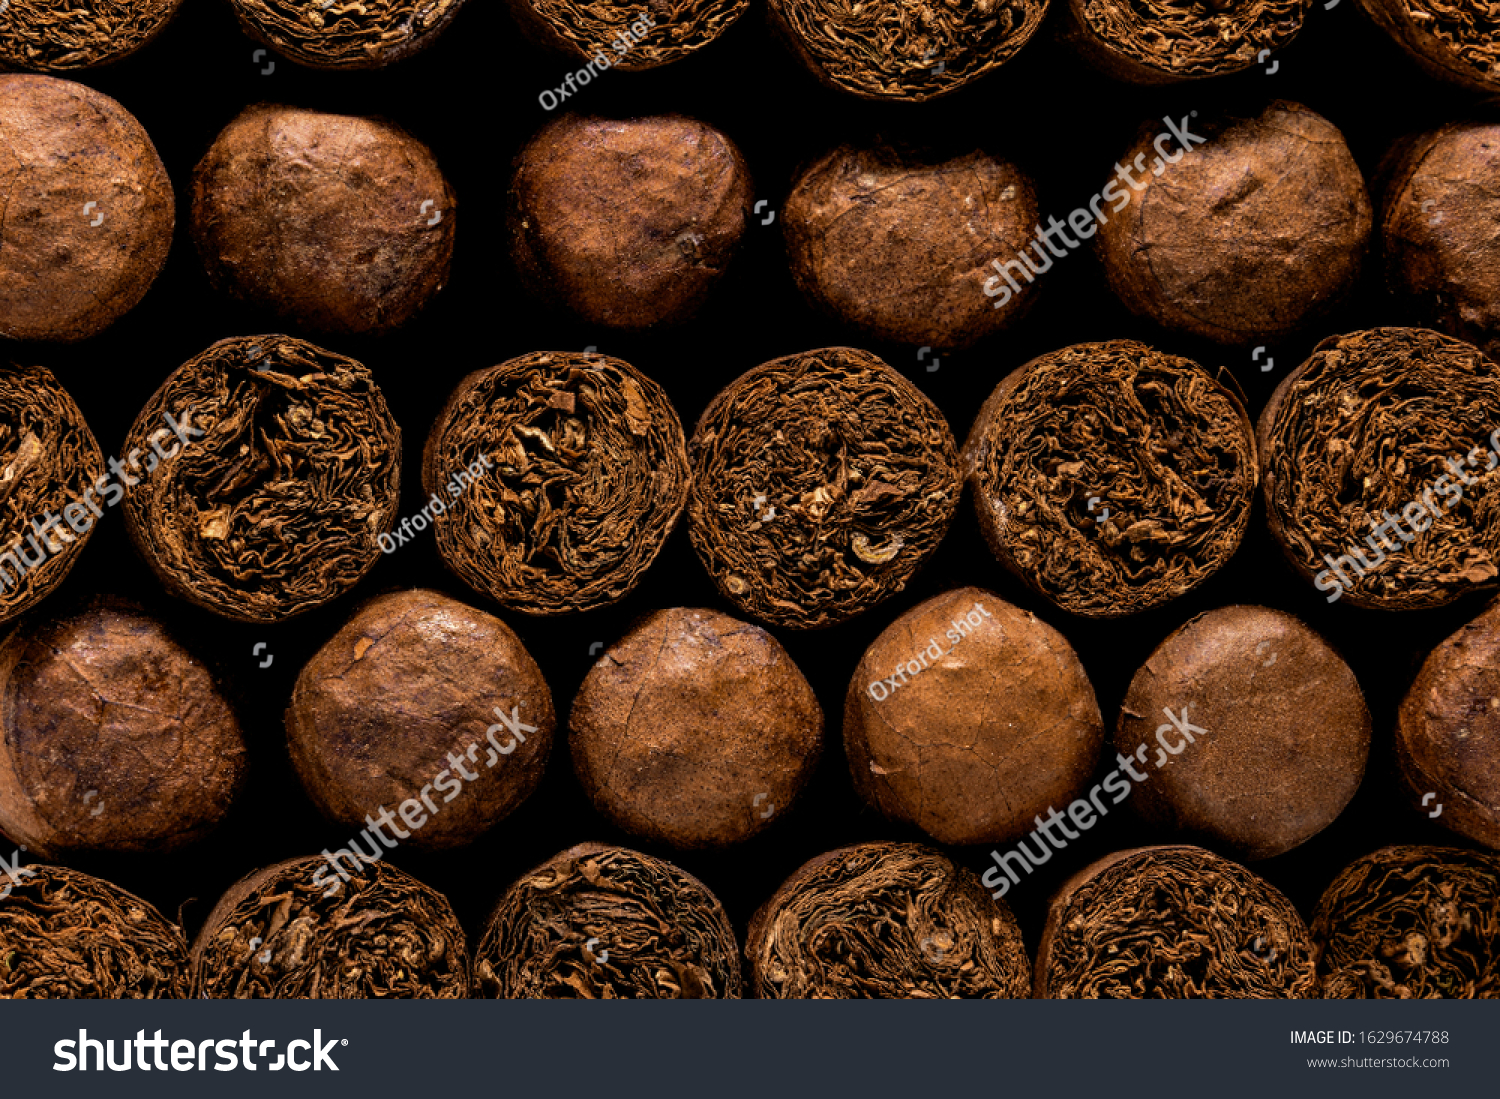 Cuban Cigars: Close up of luxury hand made cigars stacked in a storage box. Tobacco display background or wall art. #1629674788